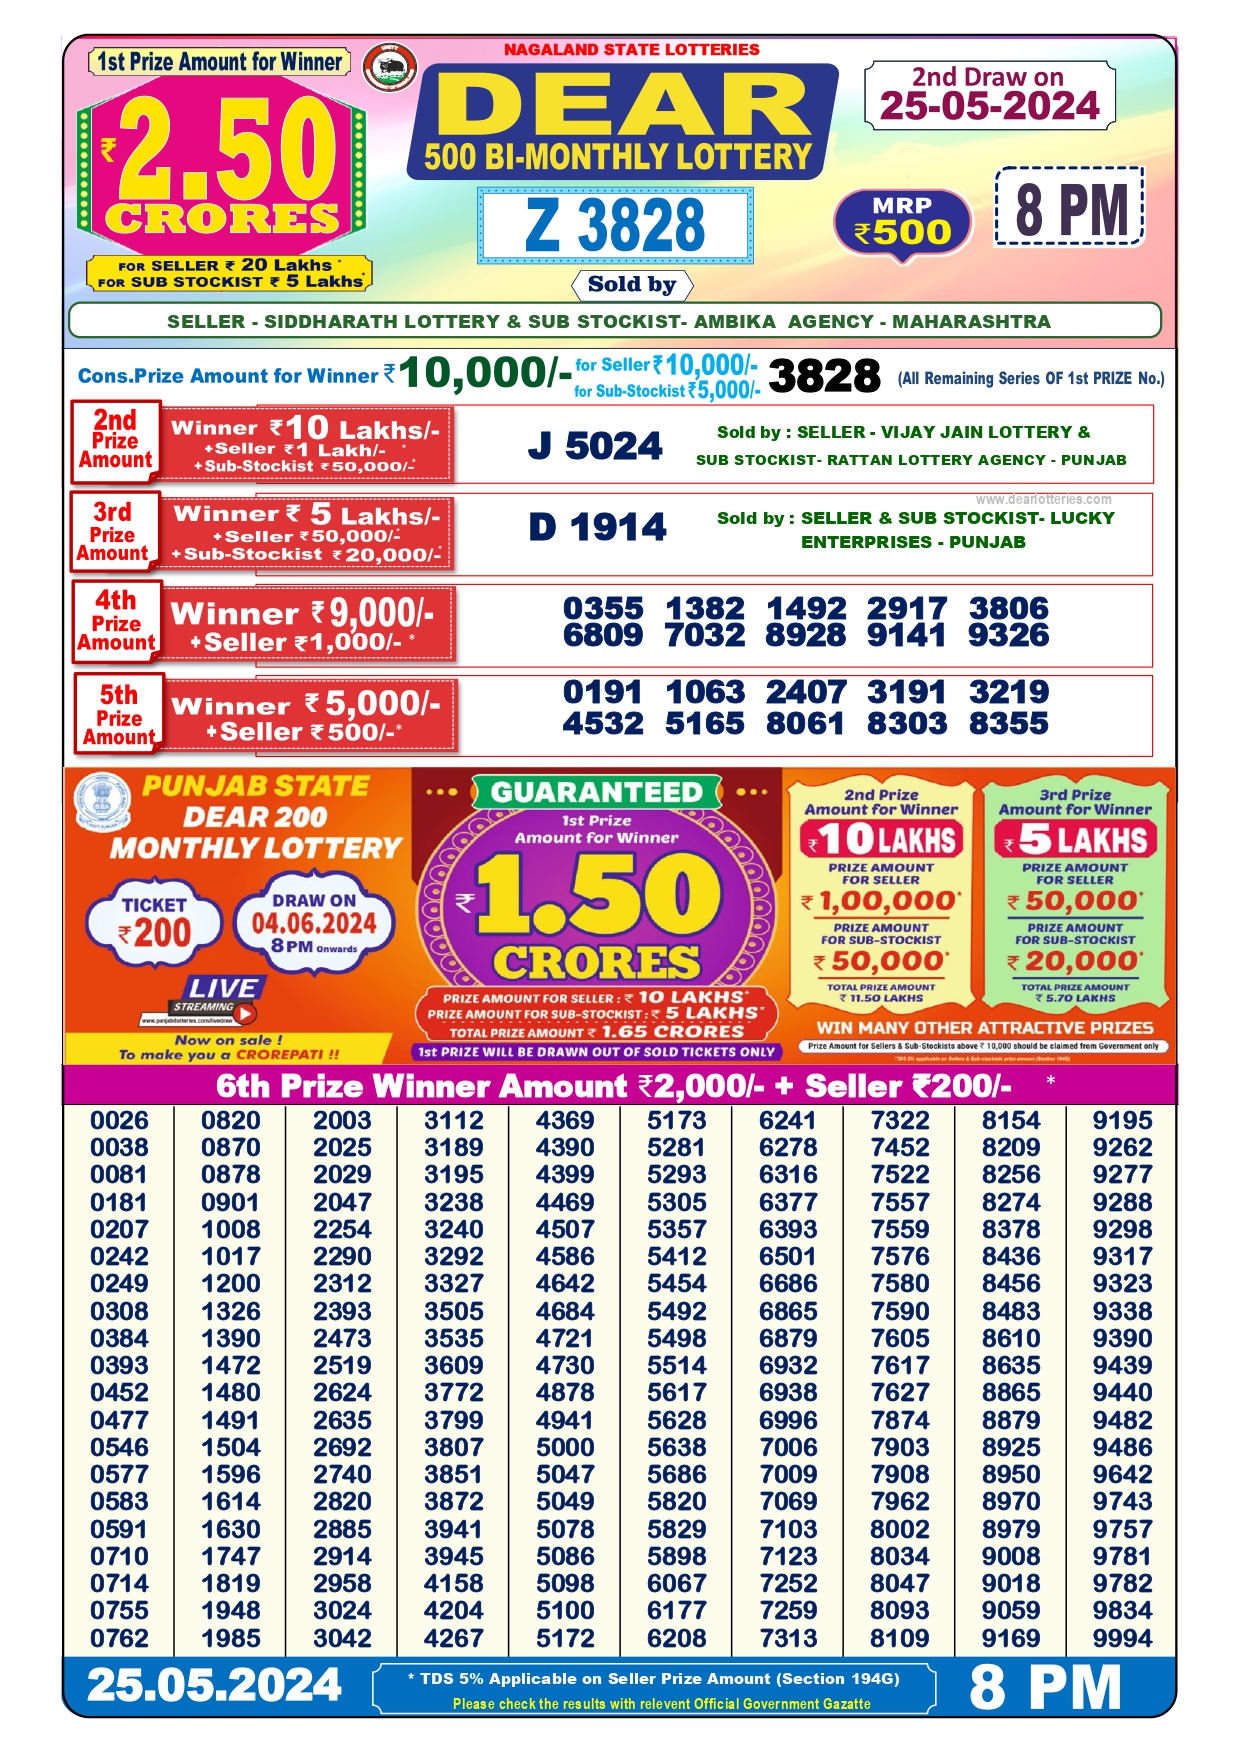 NAGALAND DEAR 500 MONTHLY LOTTERY RESULT